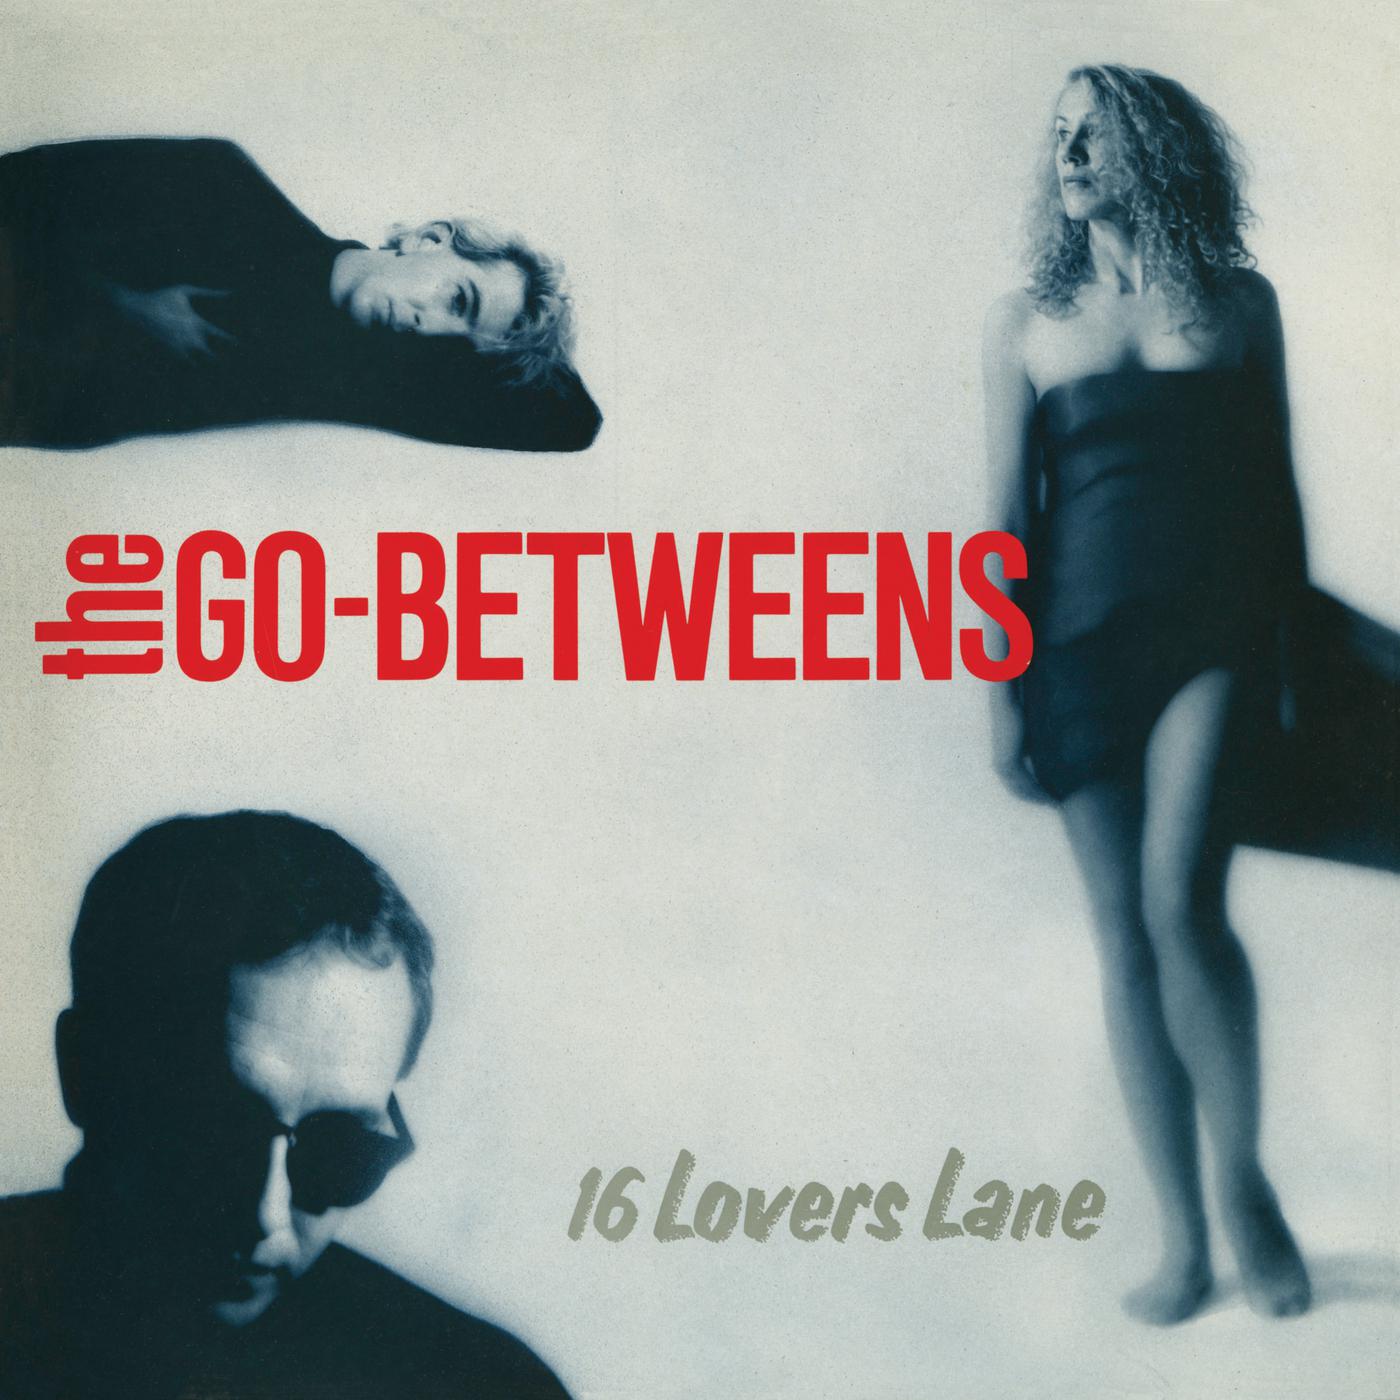 The Go-Betweens - Dive for Your Memory